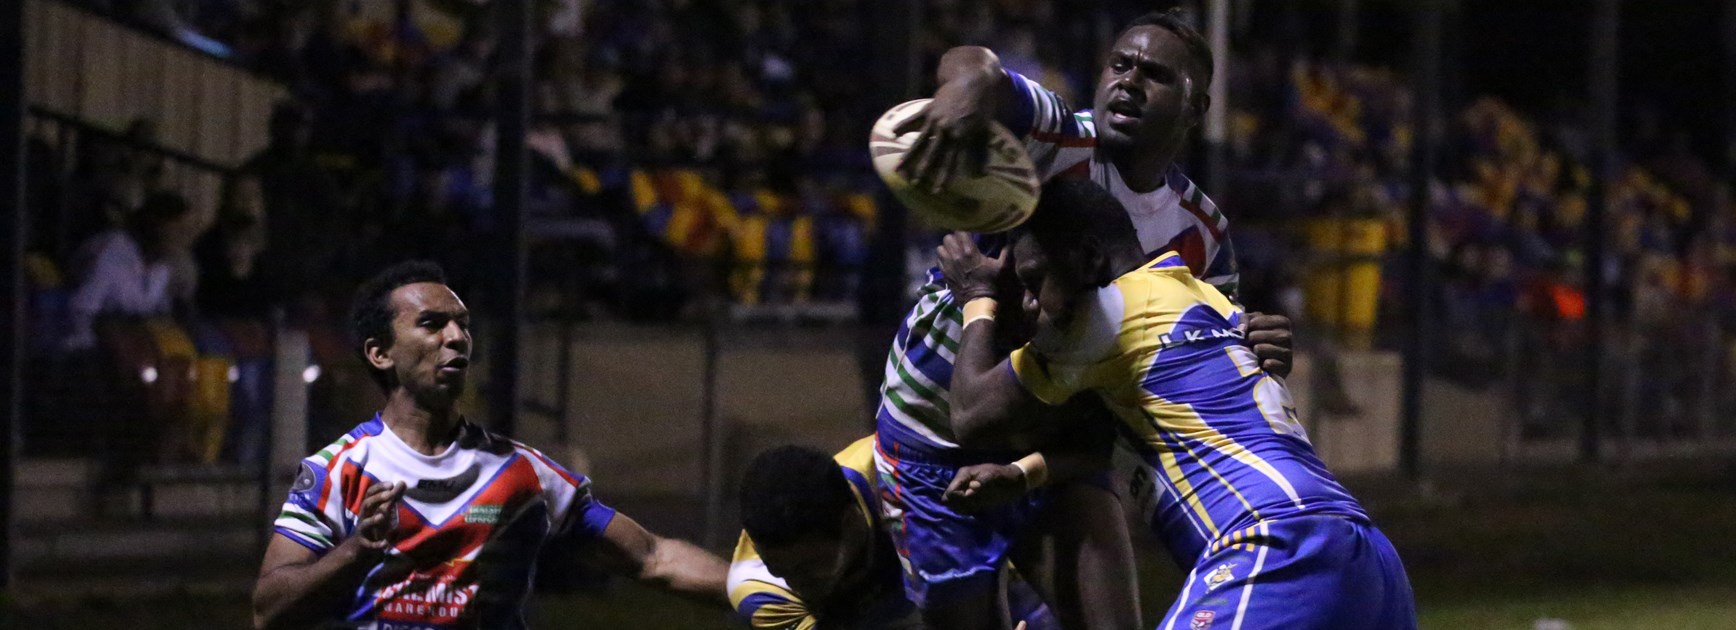 Kangaroos go down to Innisfail in gritty clash